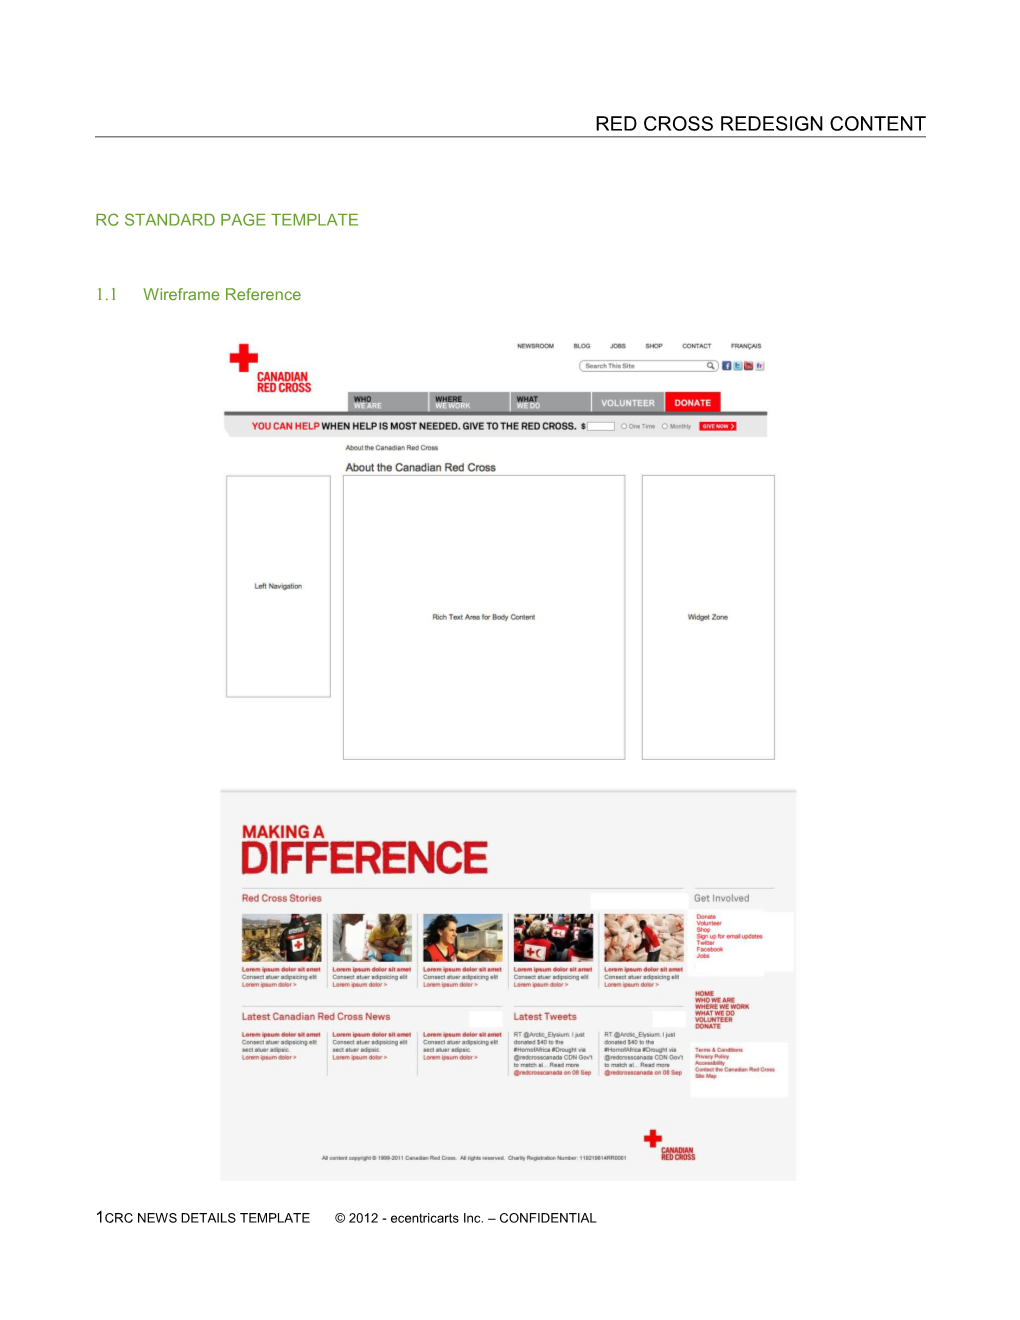 Red Cross Redesign Content